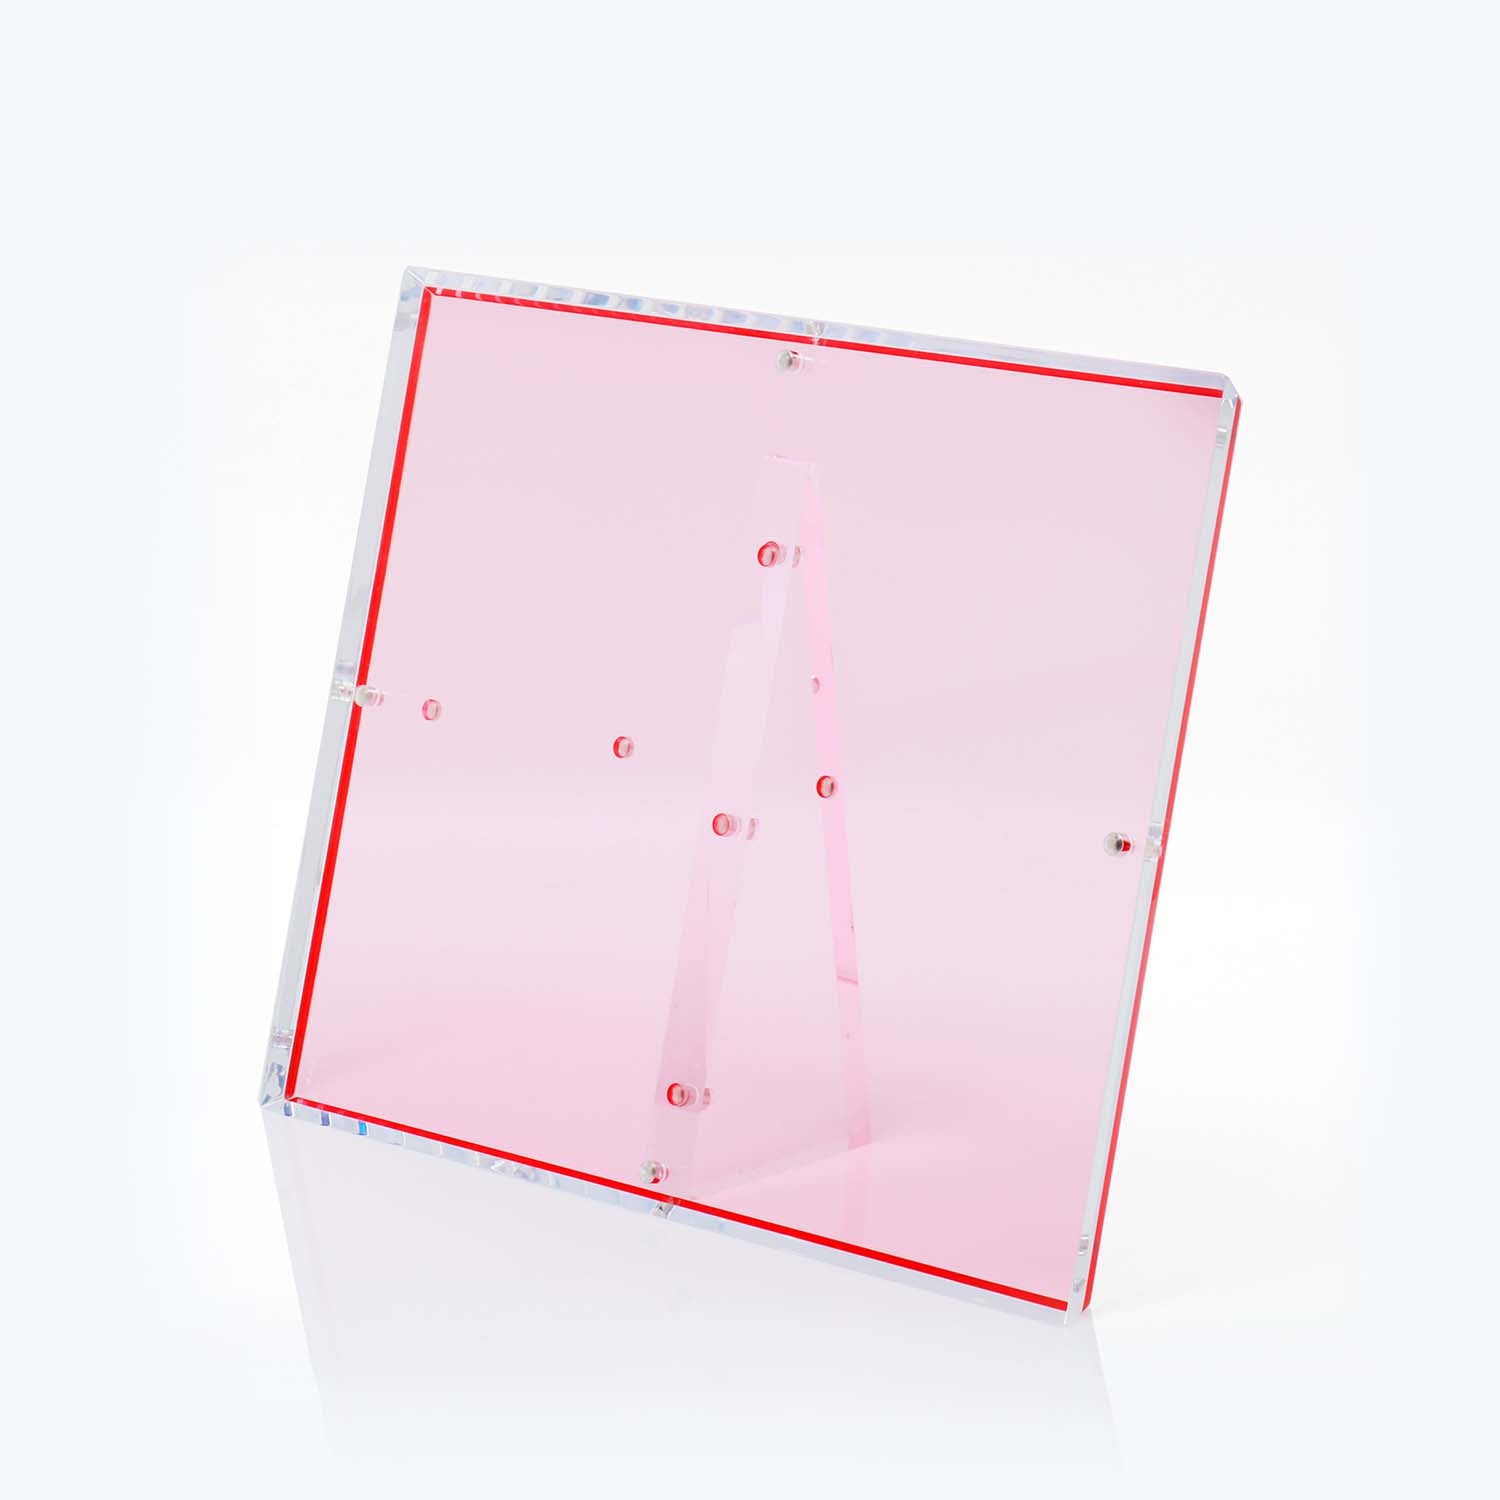 Modern pink acrylic lectern with transparent design against white background.